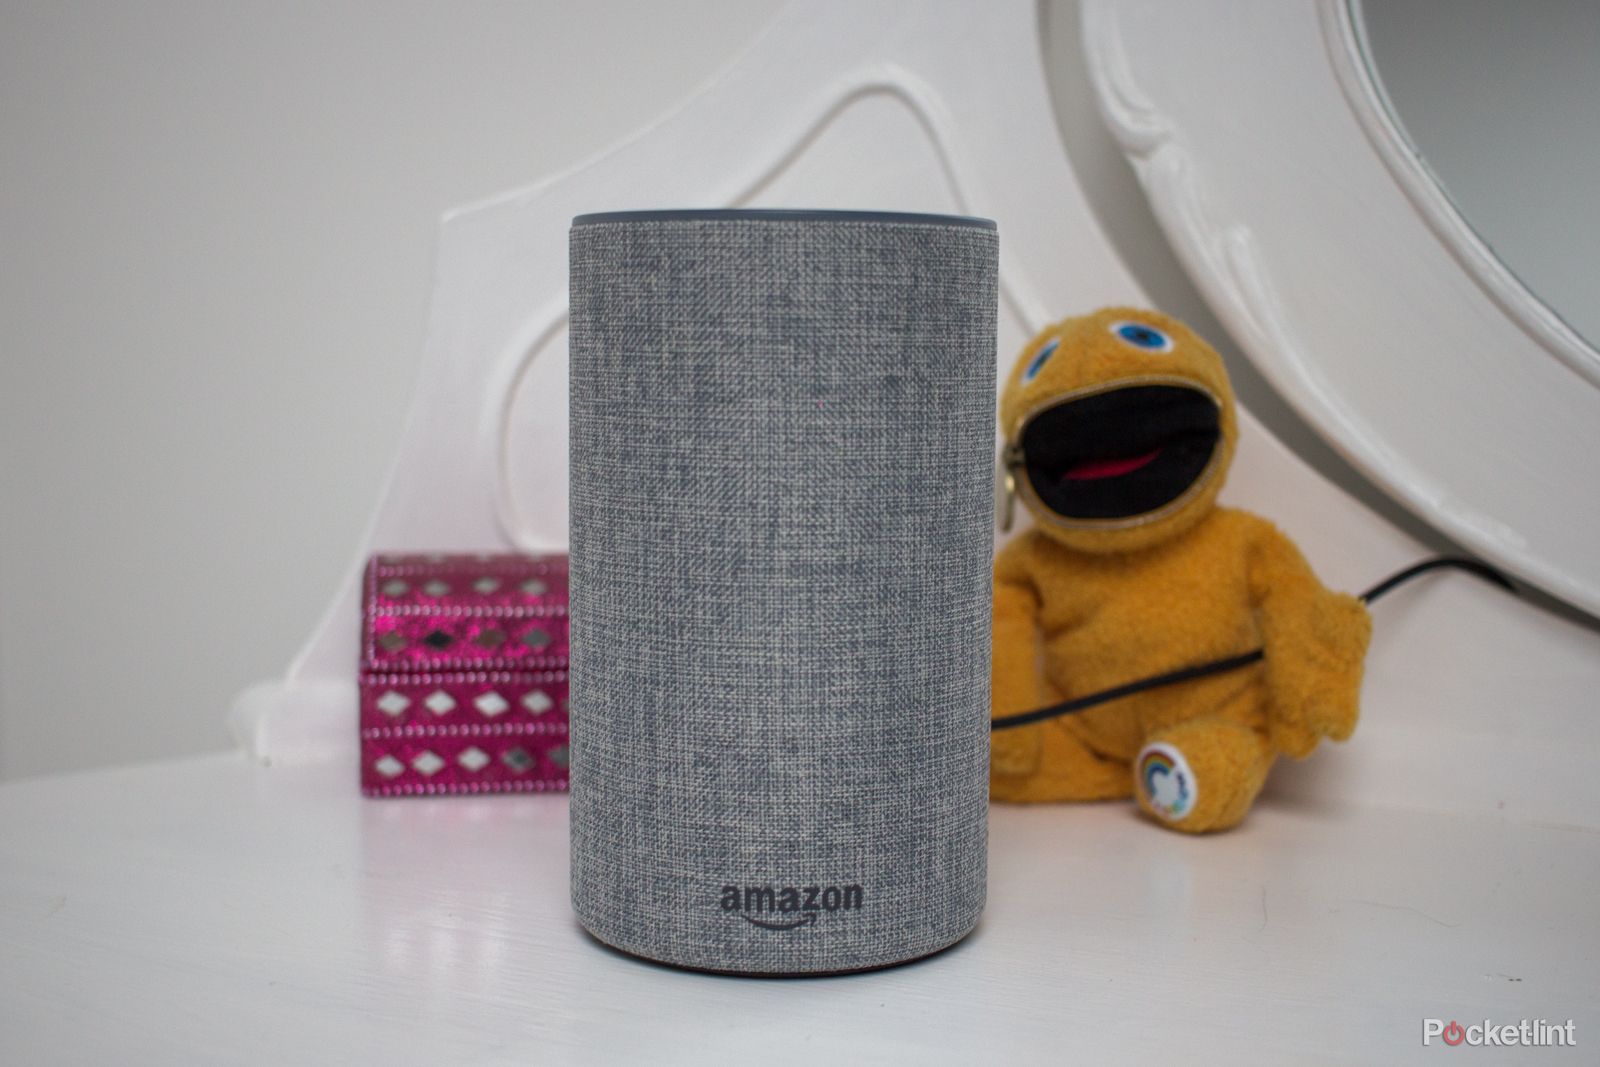 You can now listen to BBC radio and podcasts through Amazon Echo and Alexa devices image 1